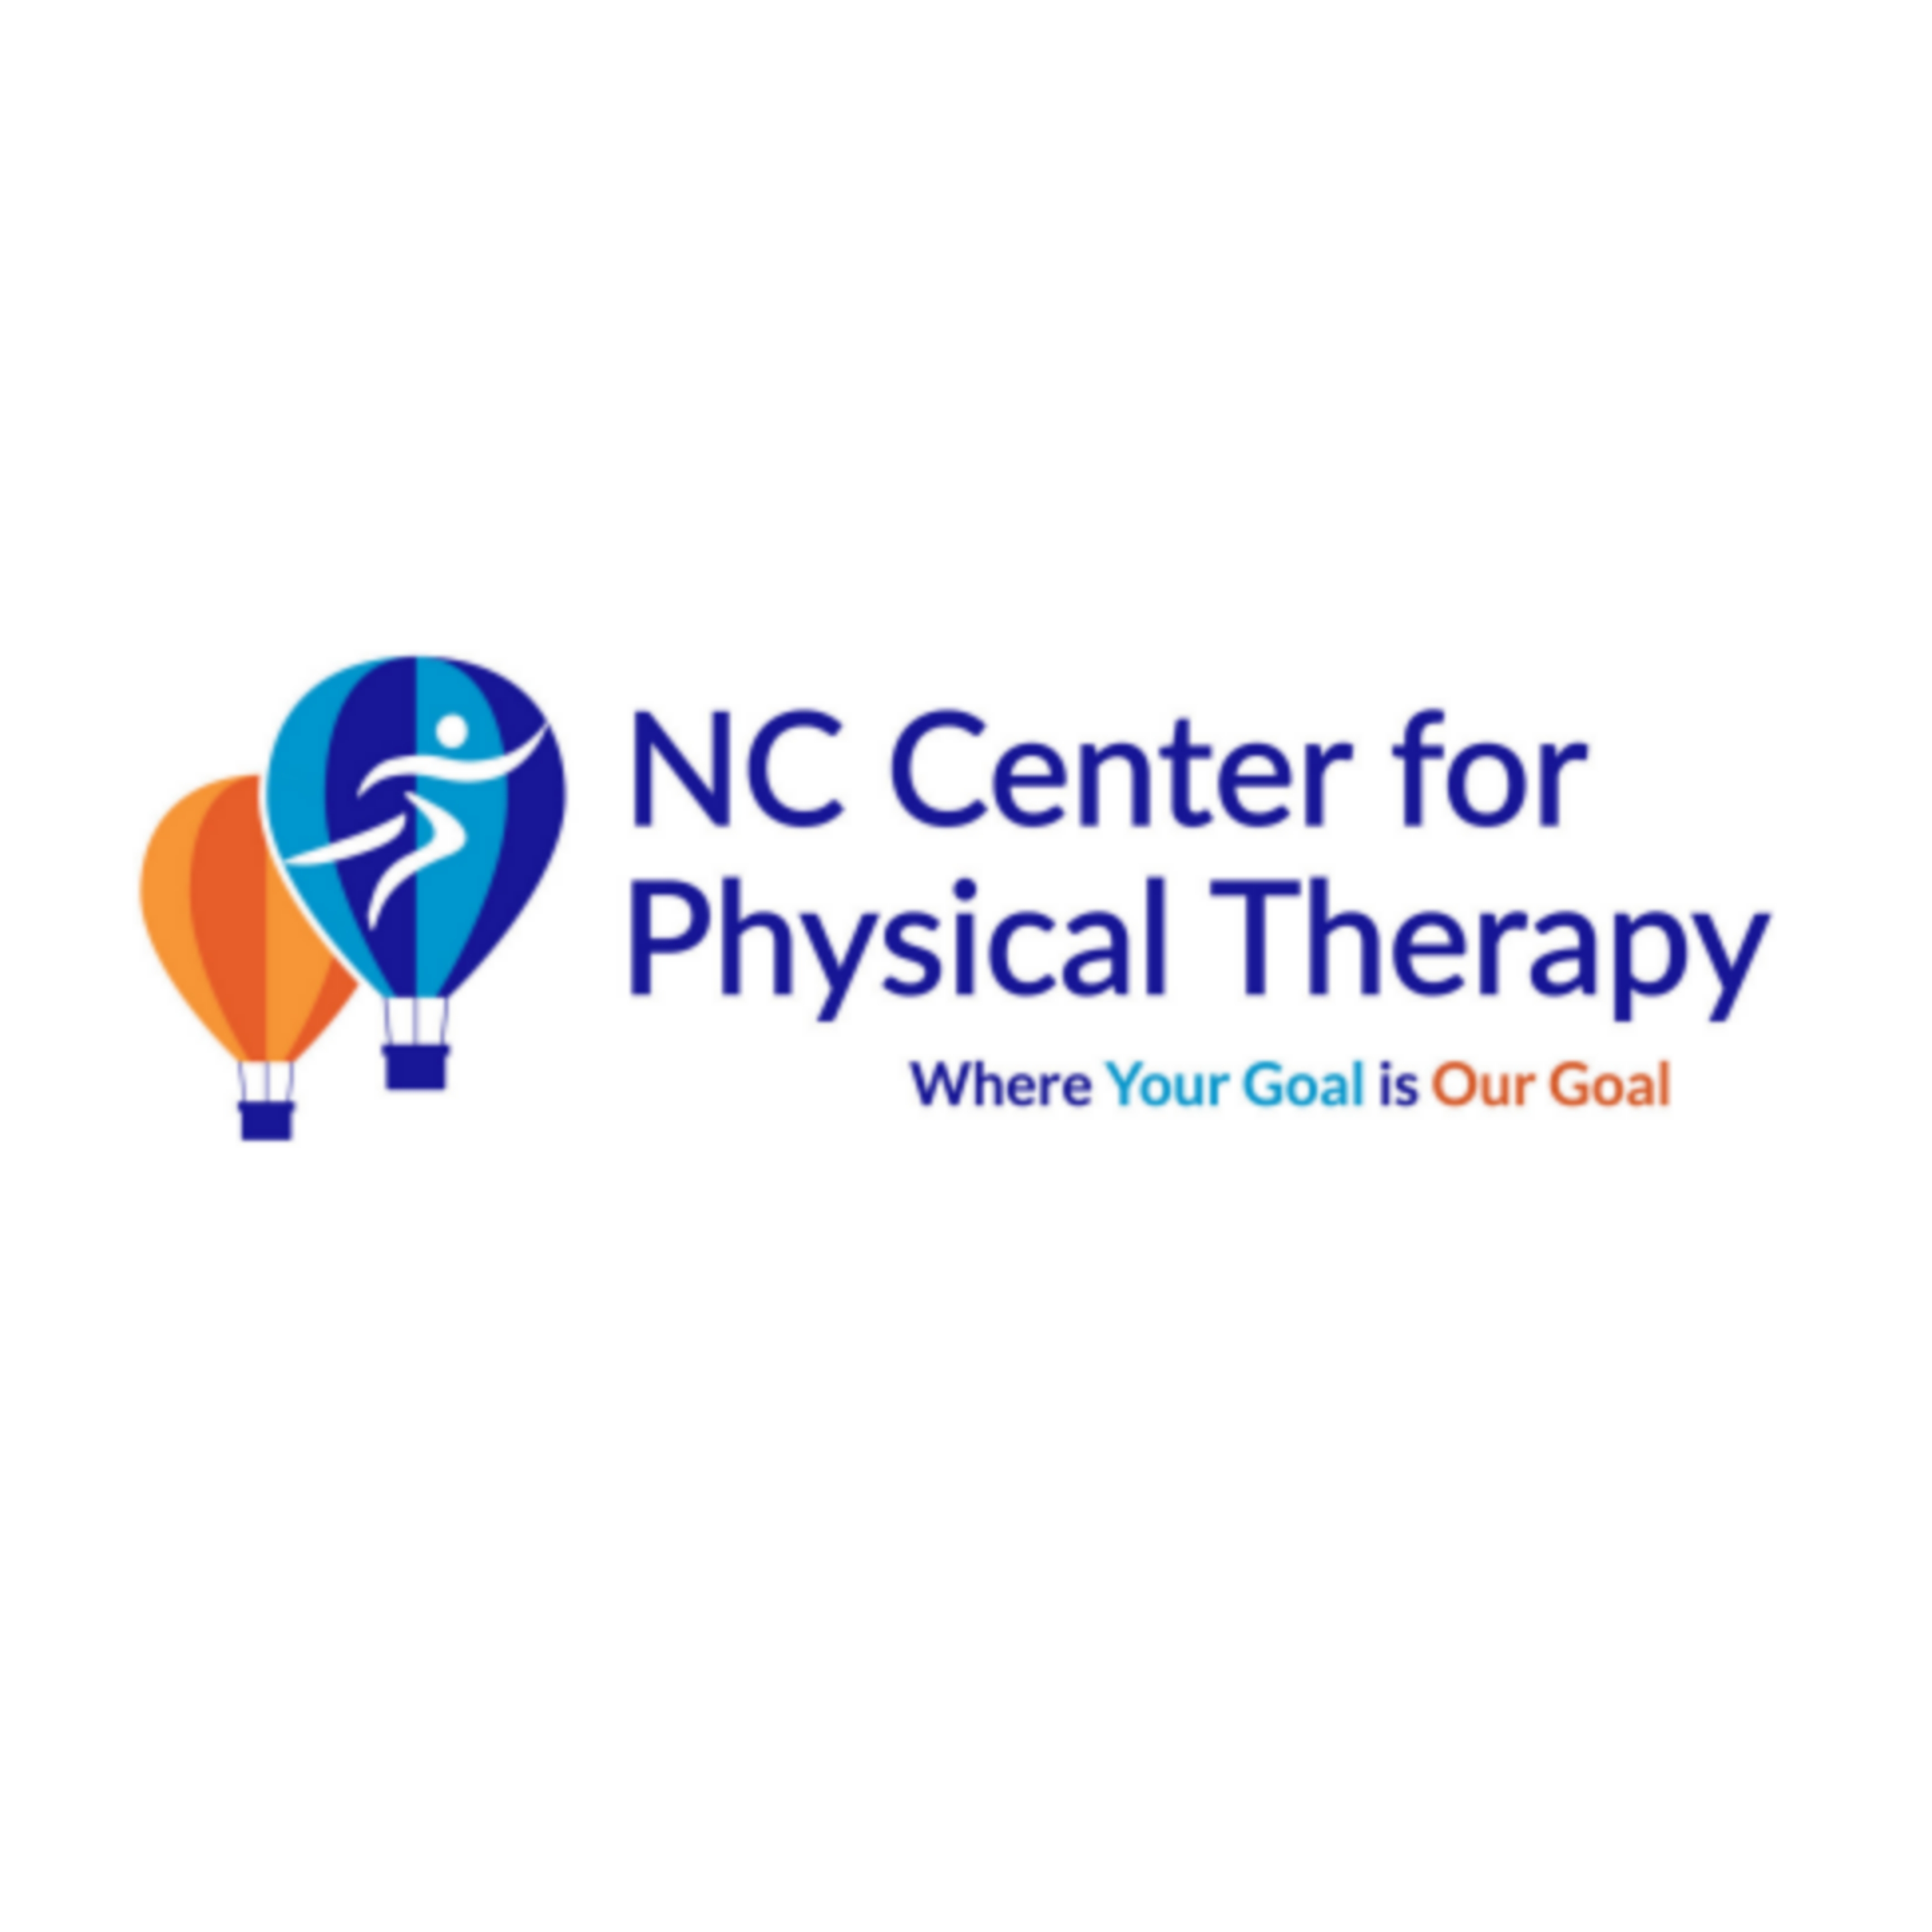 NC Center for Physical Therapy